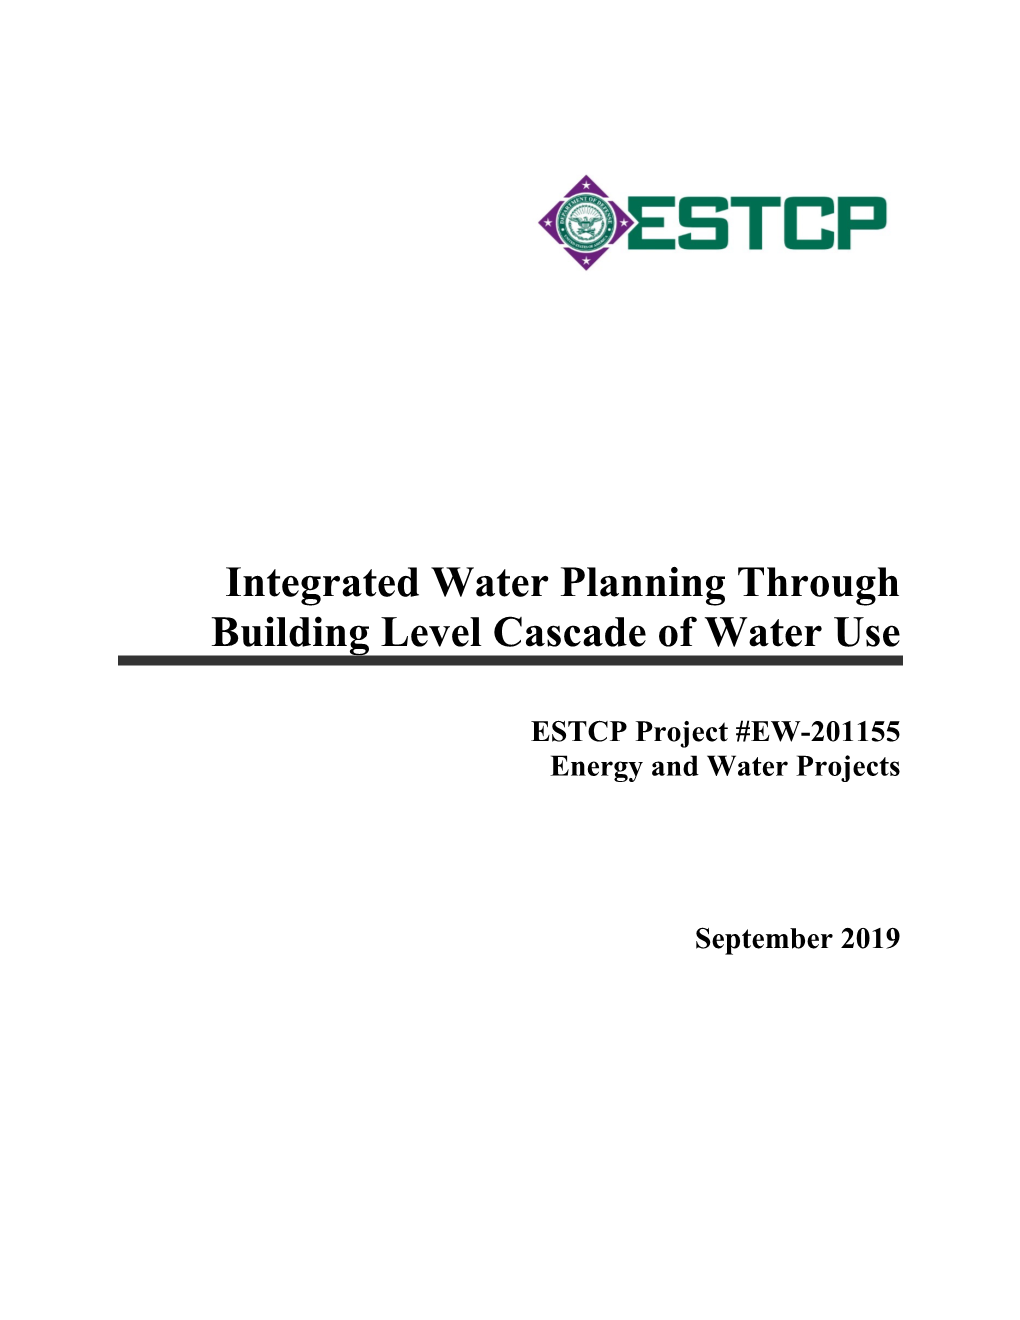 Integrated Water Planning Through Building Level Cascade of Water Use